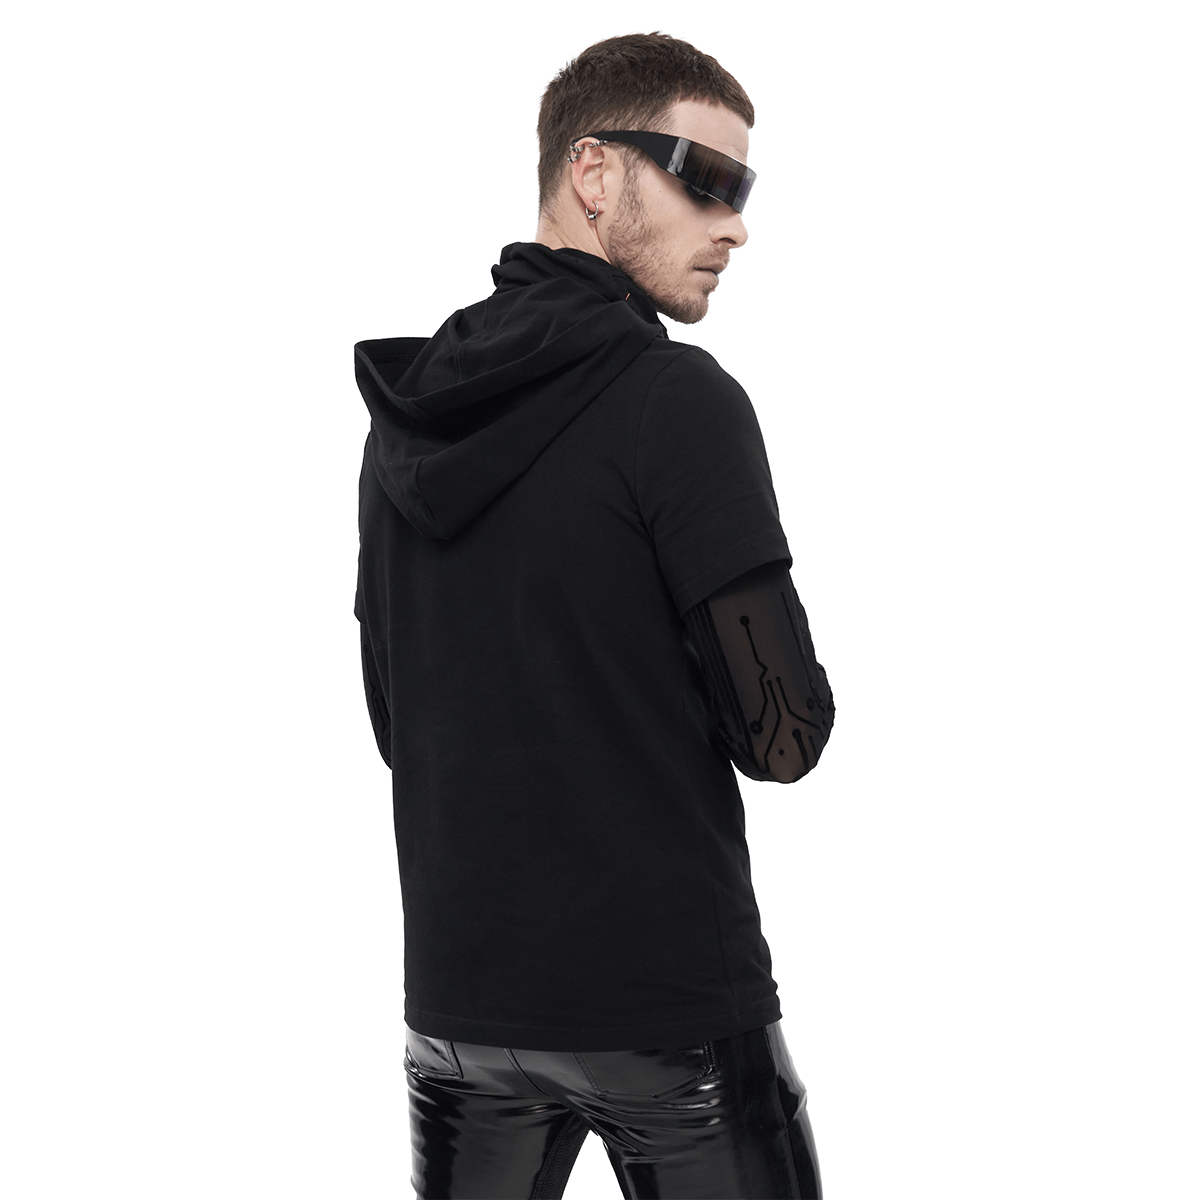 Circuit Diagram Print Black Sweatshirt with Hood and Mask for Men / Cyberpunk Style Apparel